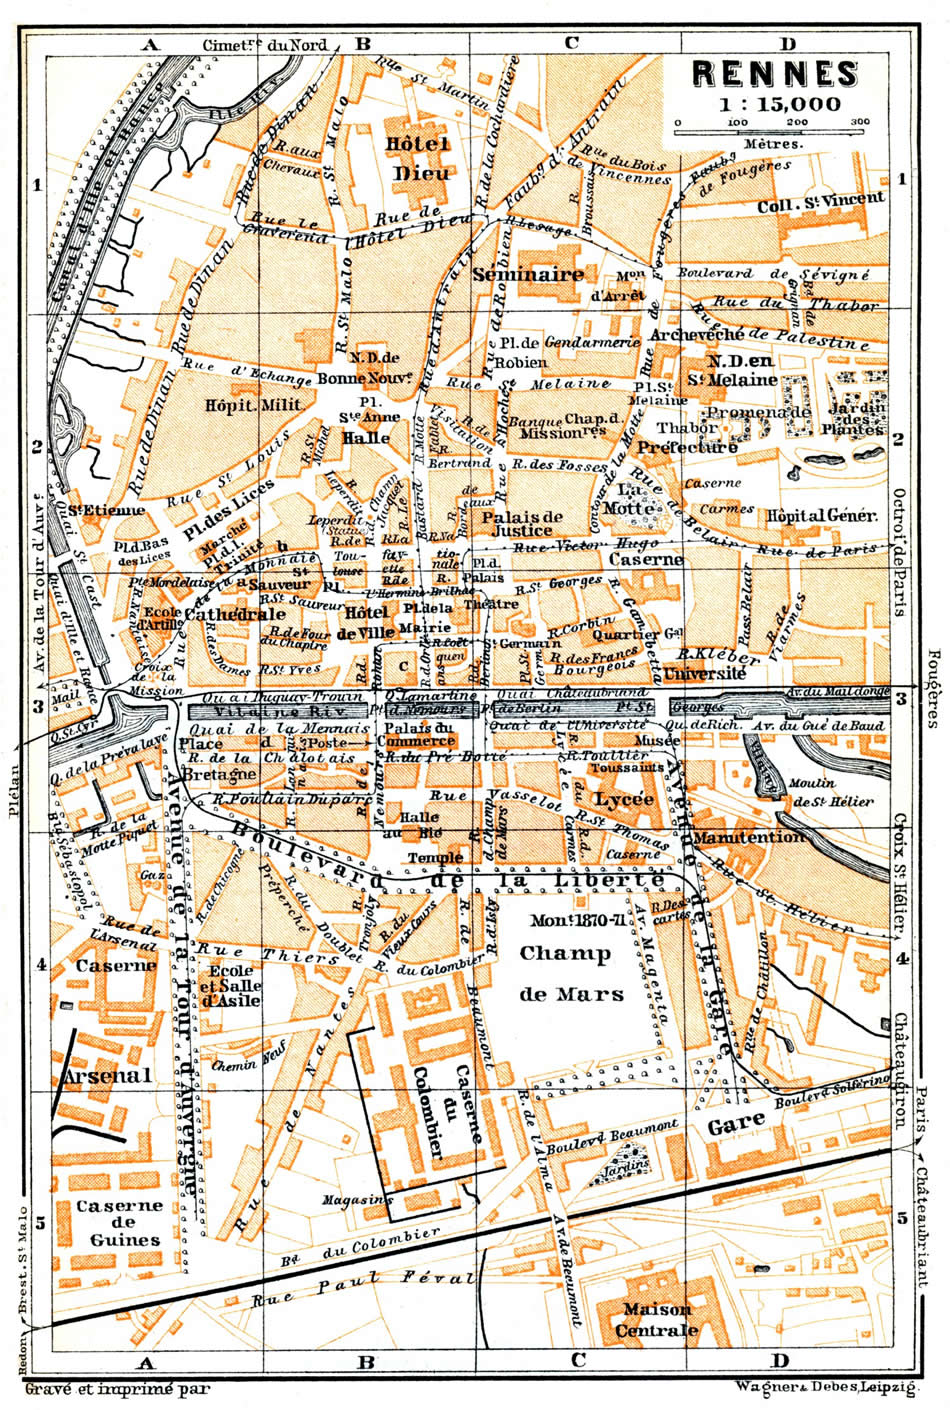 Rennes map 1899